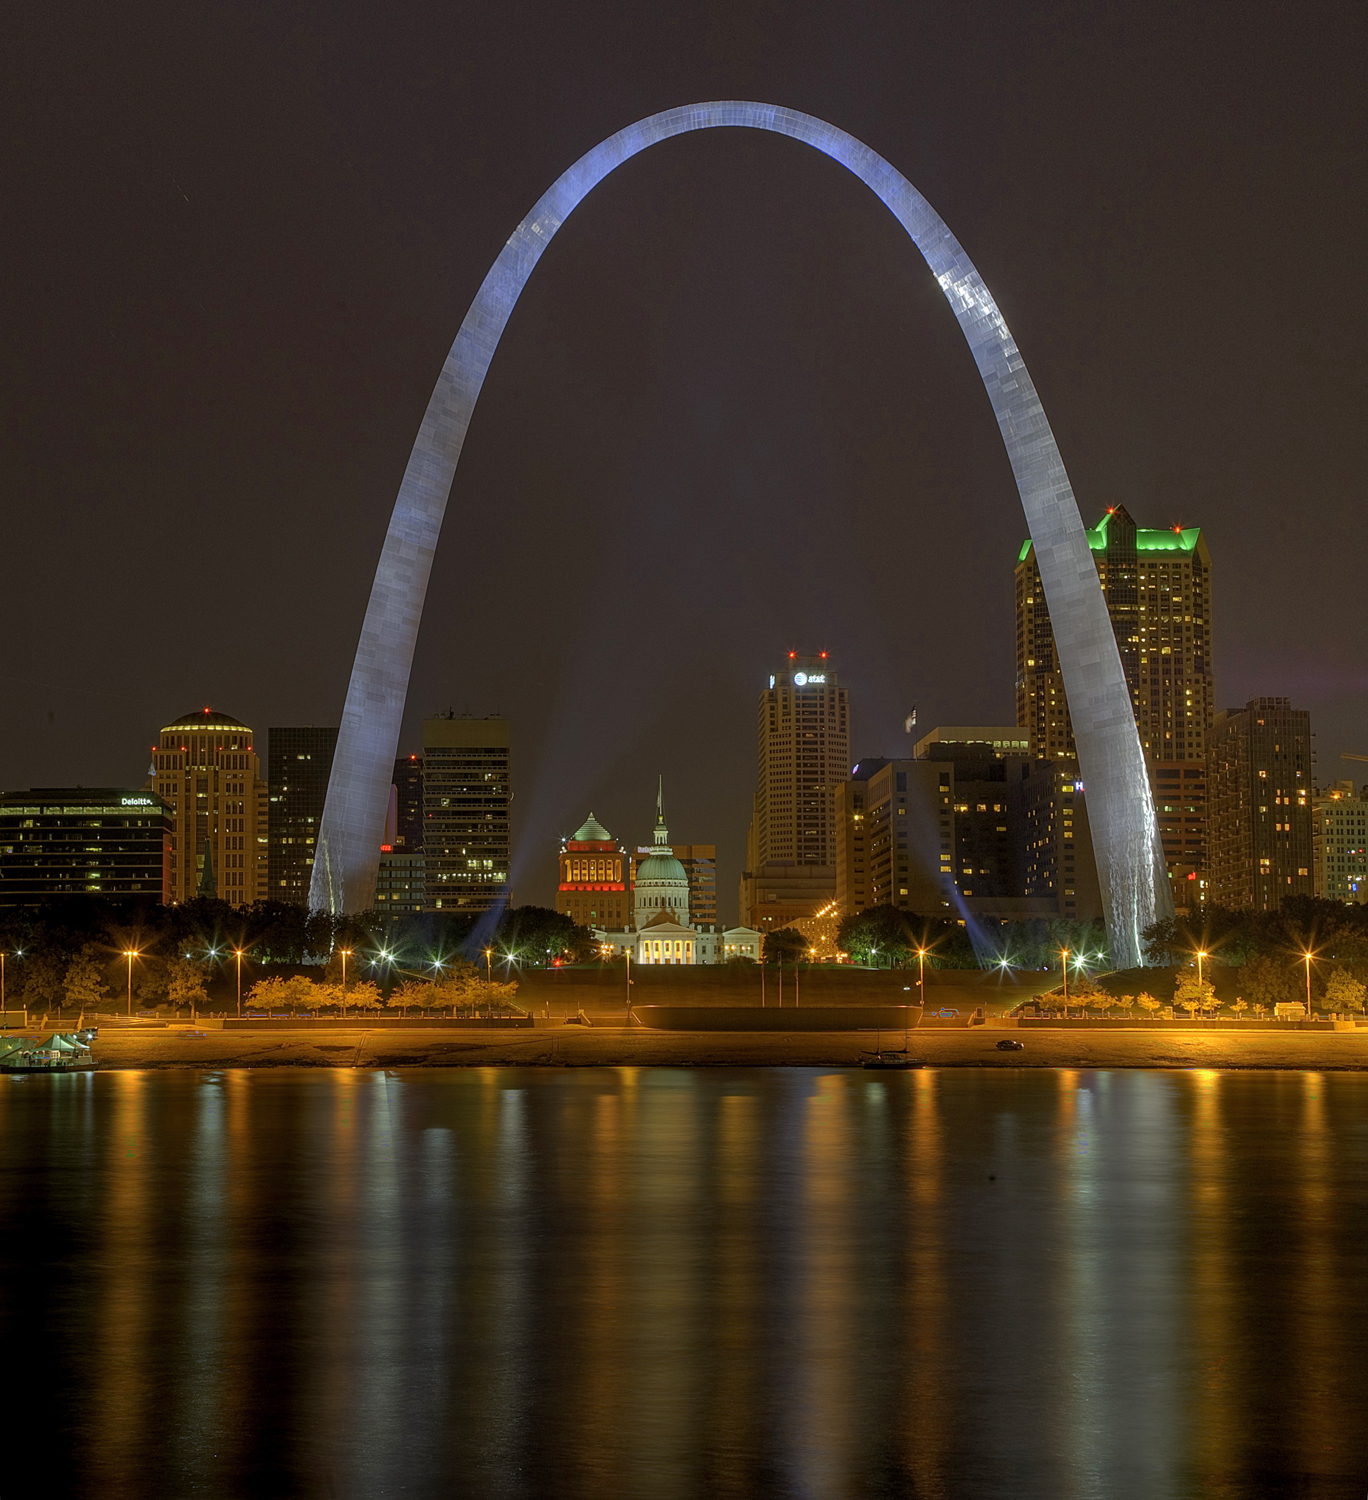 Meet me in St. Louis -- for a most sinful time! - www.strongerinc.org